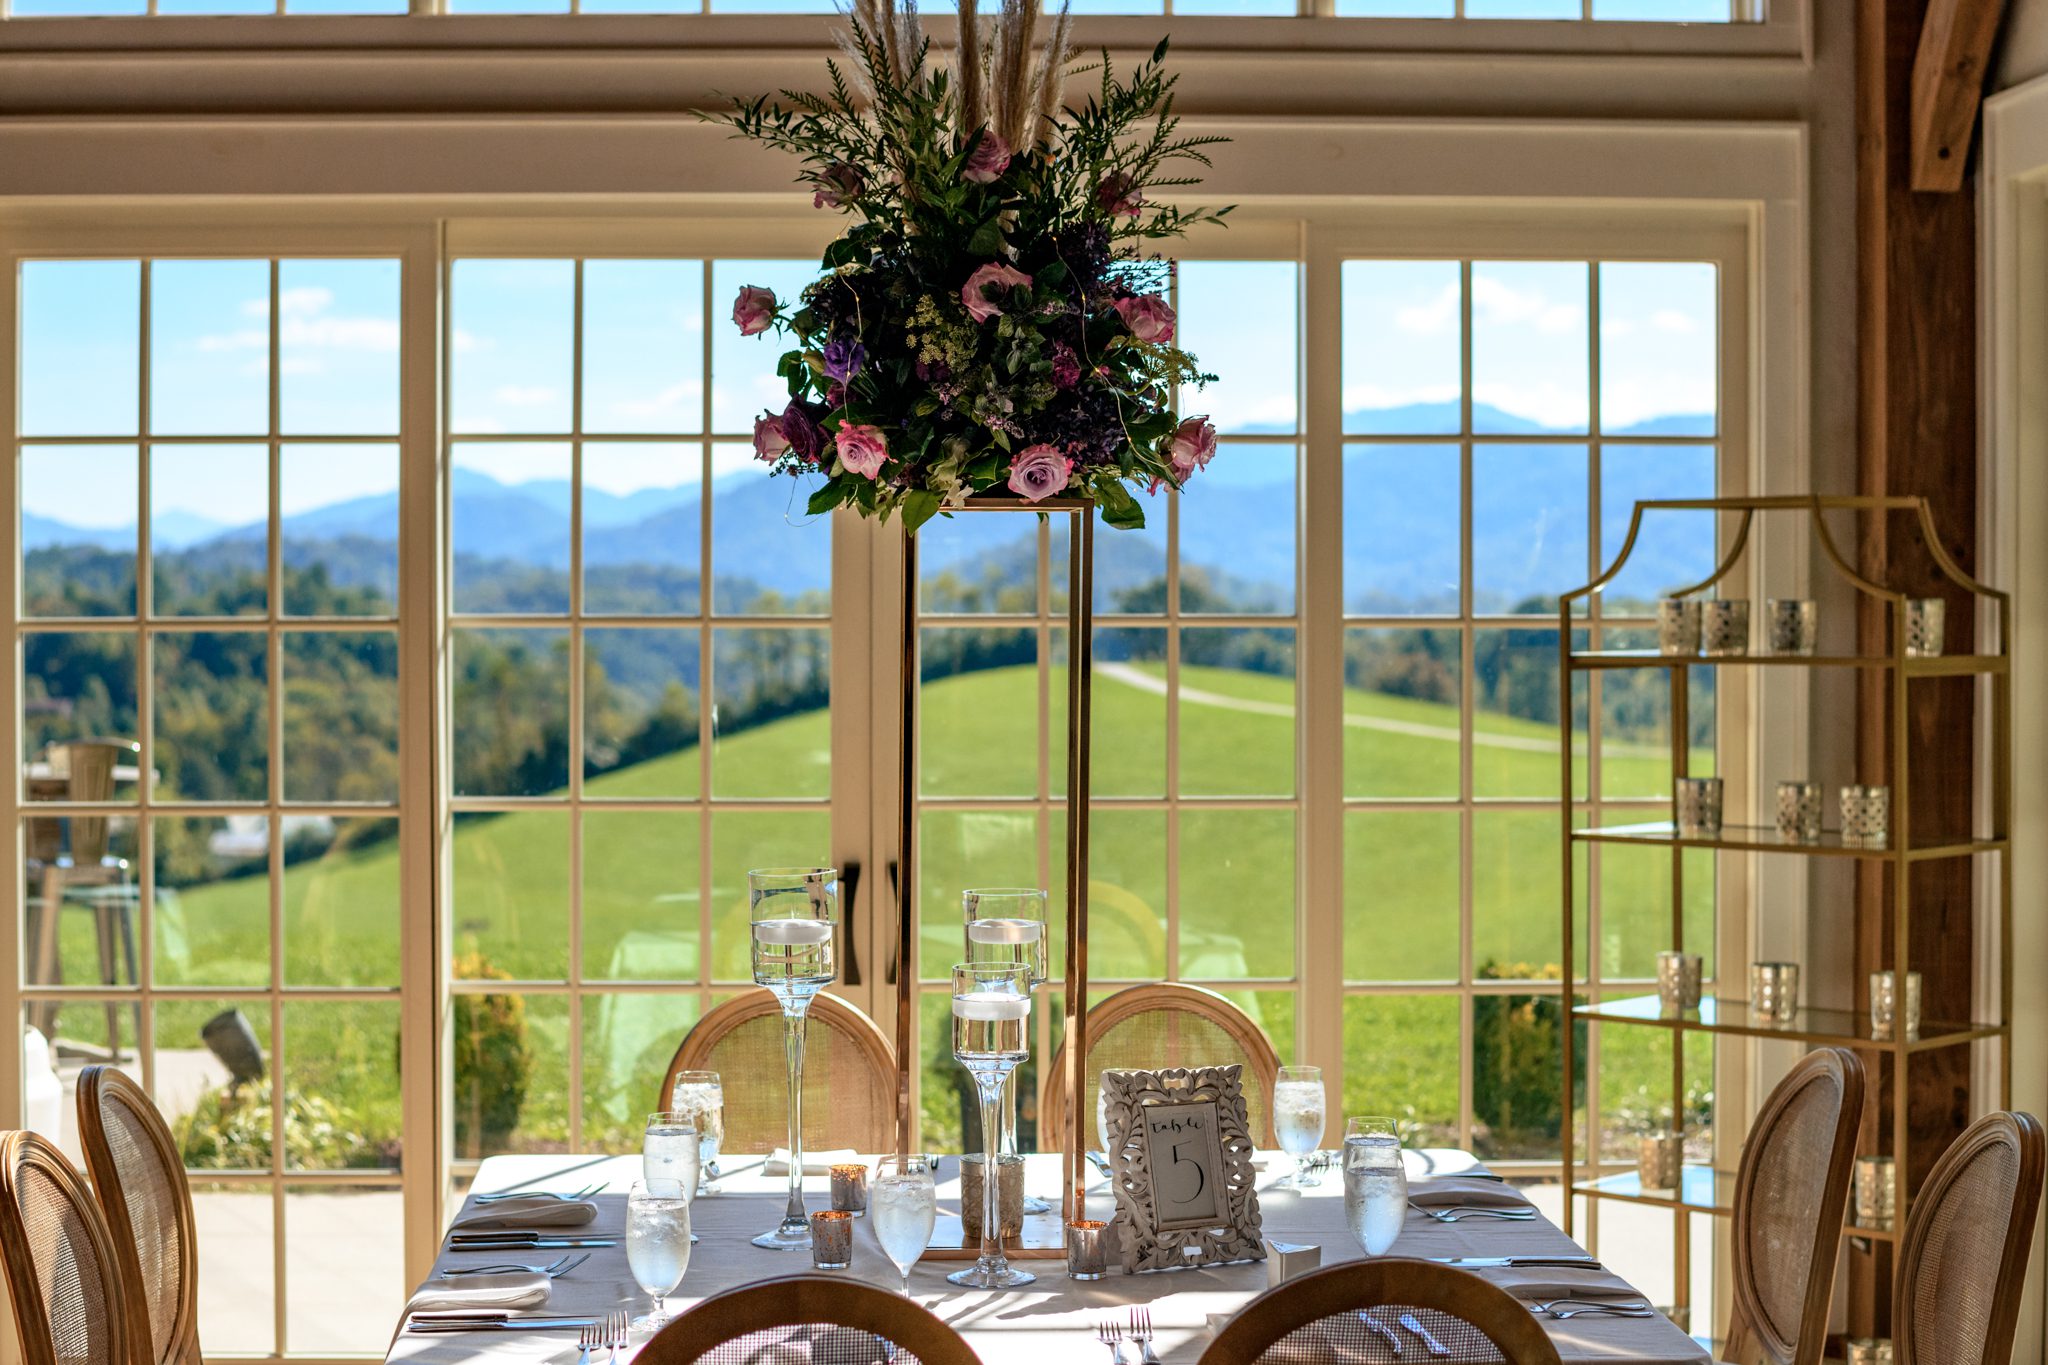 view from inside the chateau looking towards the mountains at the ridge asheville wedding venue